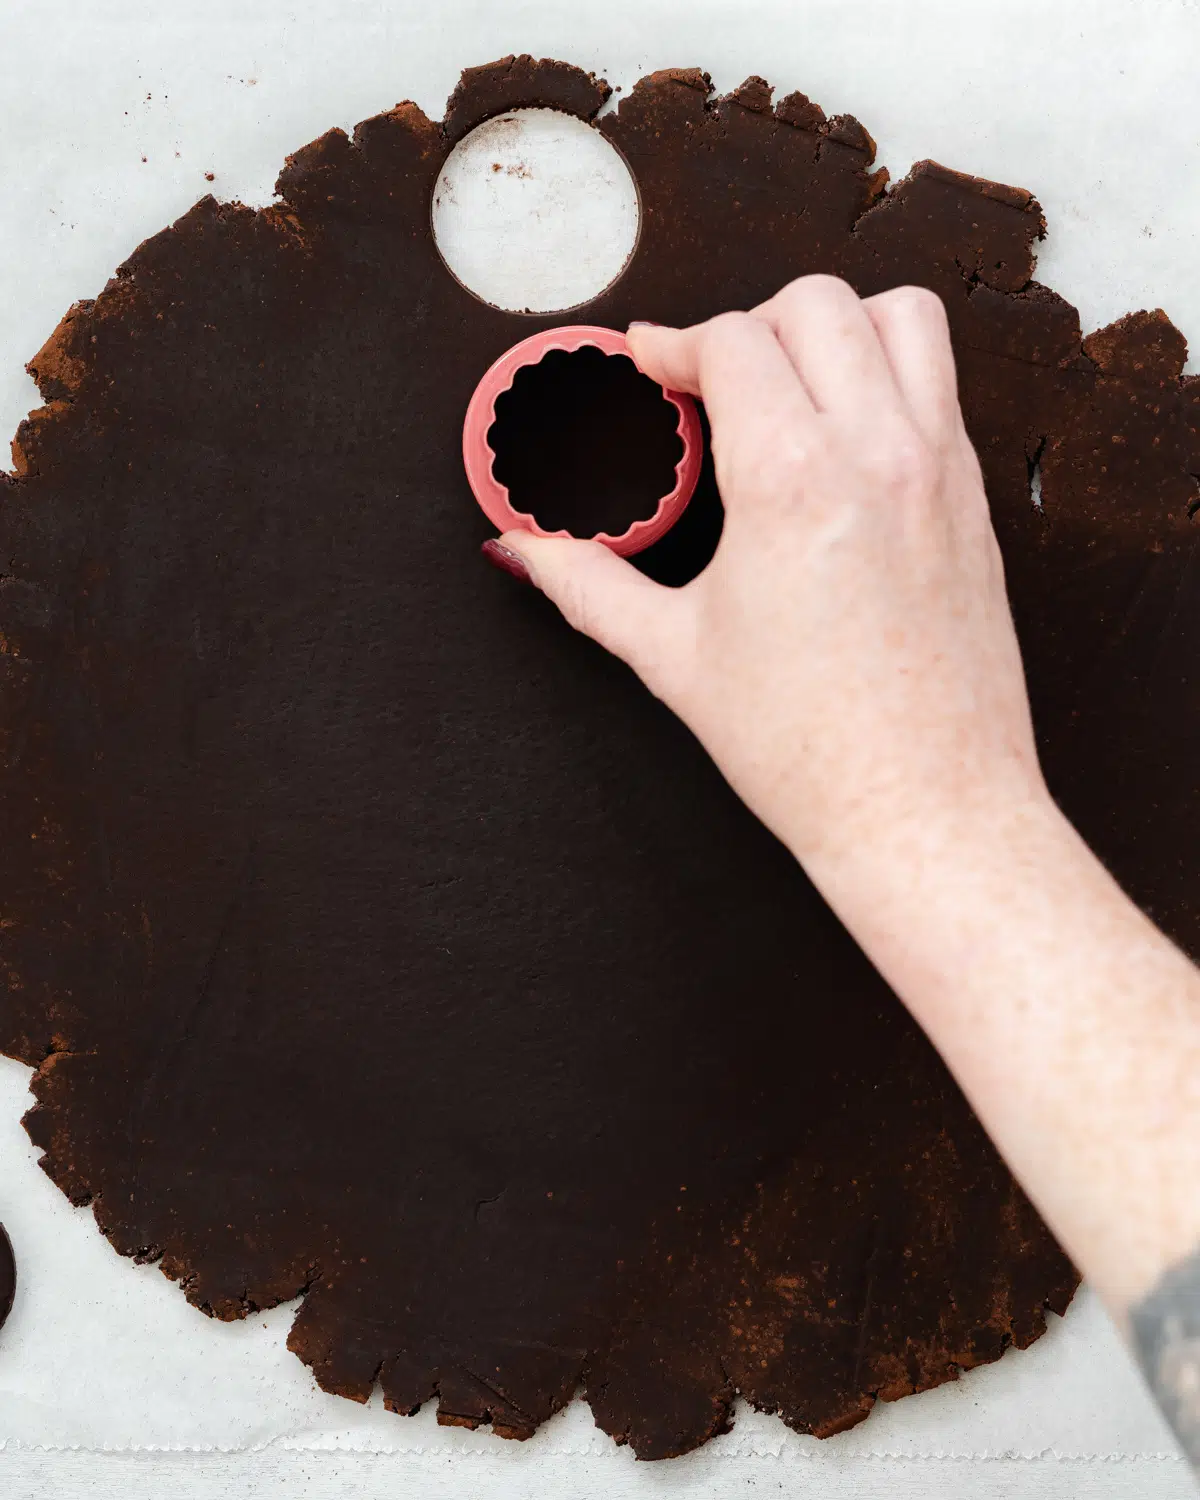 cutting circles out of oreo cookie dough with a cookie cutter.